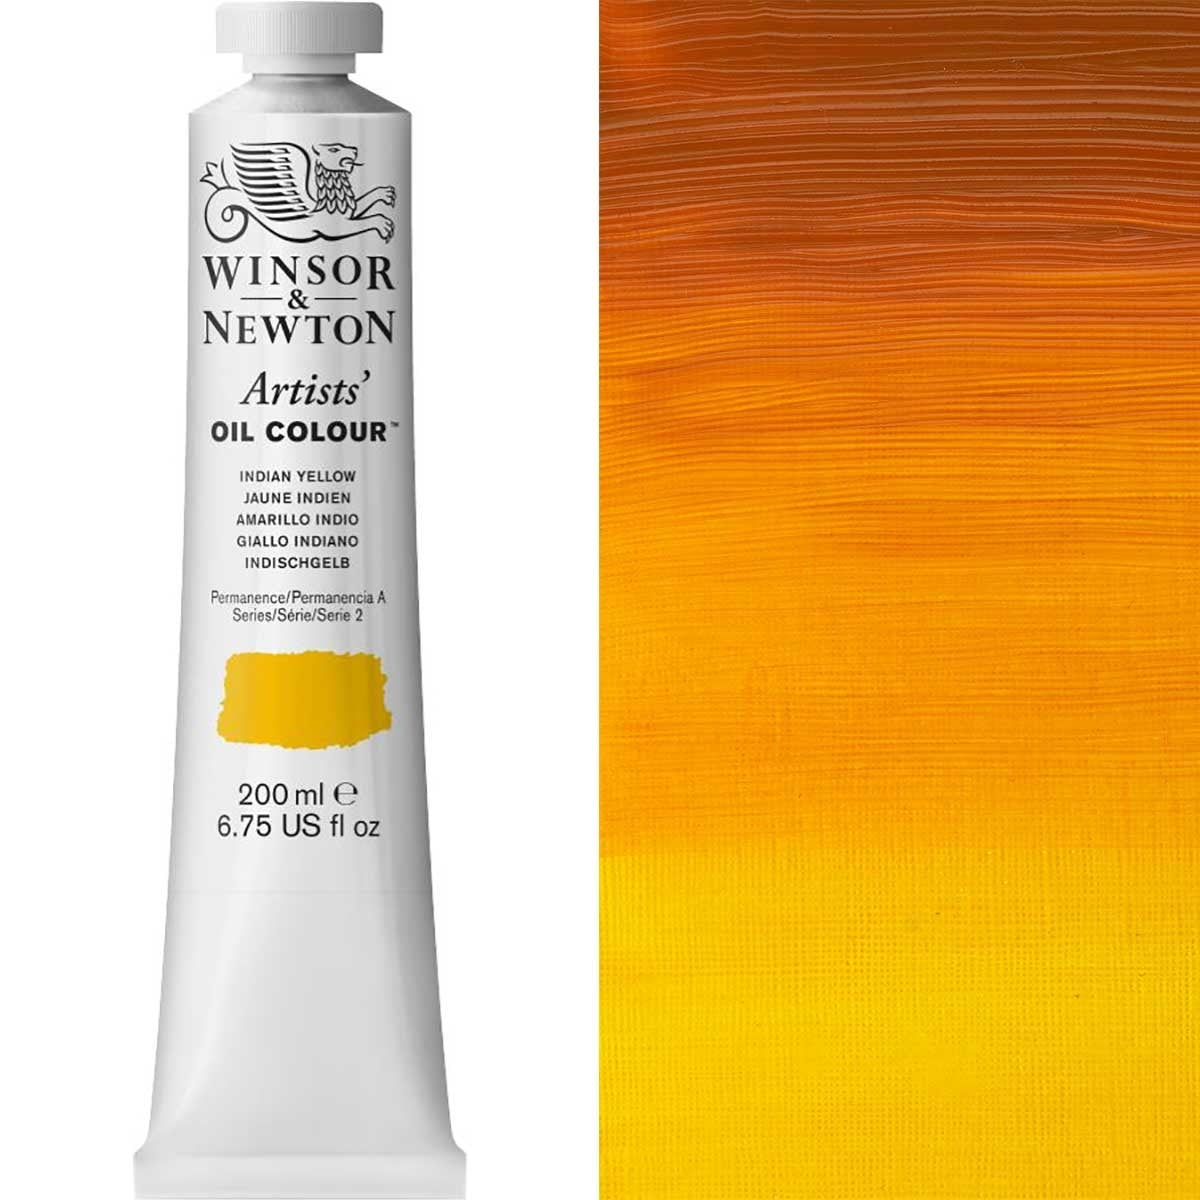 Winsor and Newton - Artists' Oil Colour - 200ml - Indian Yellow